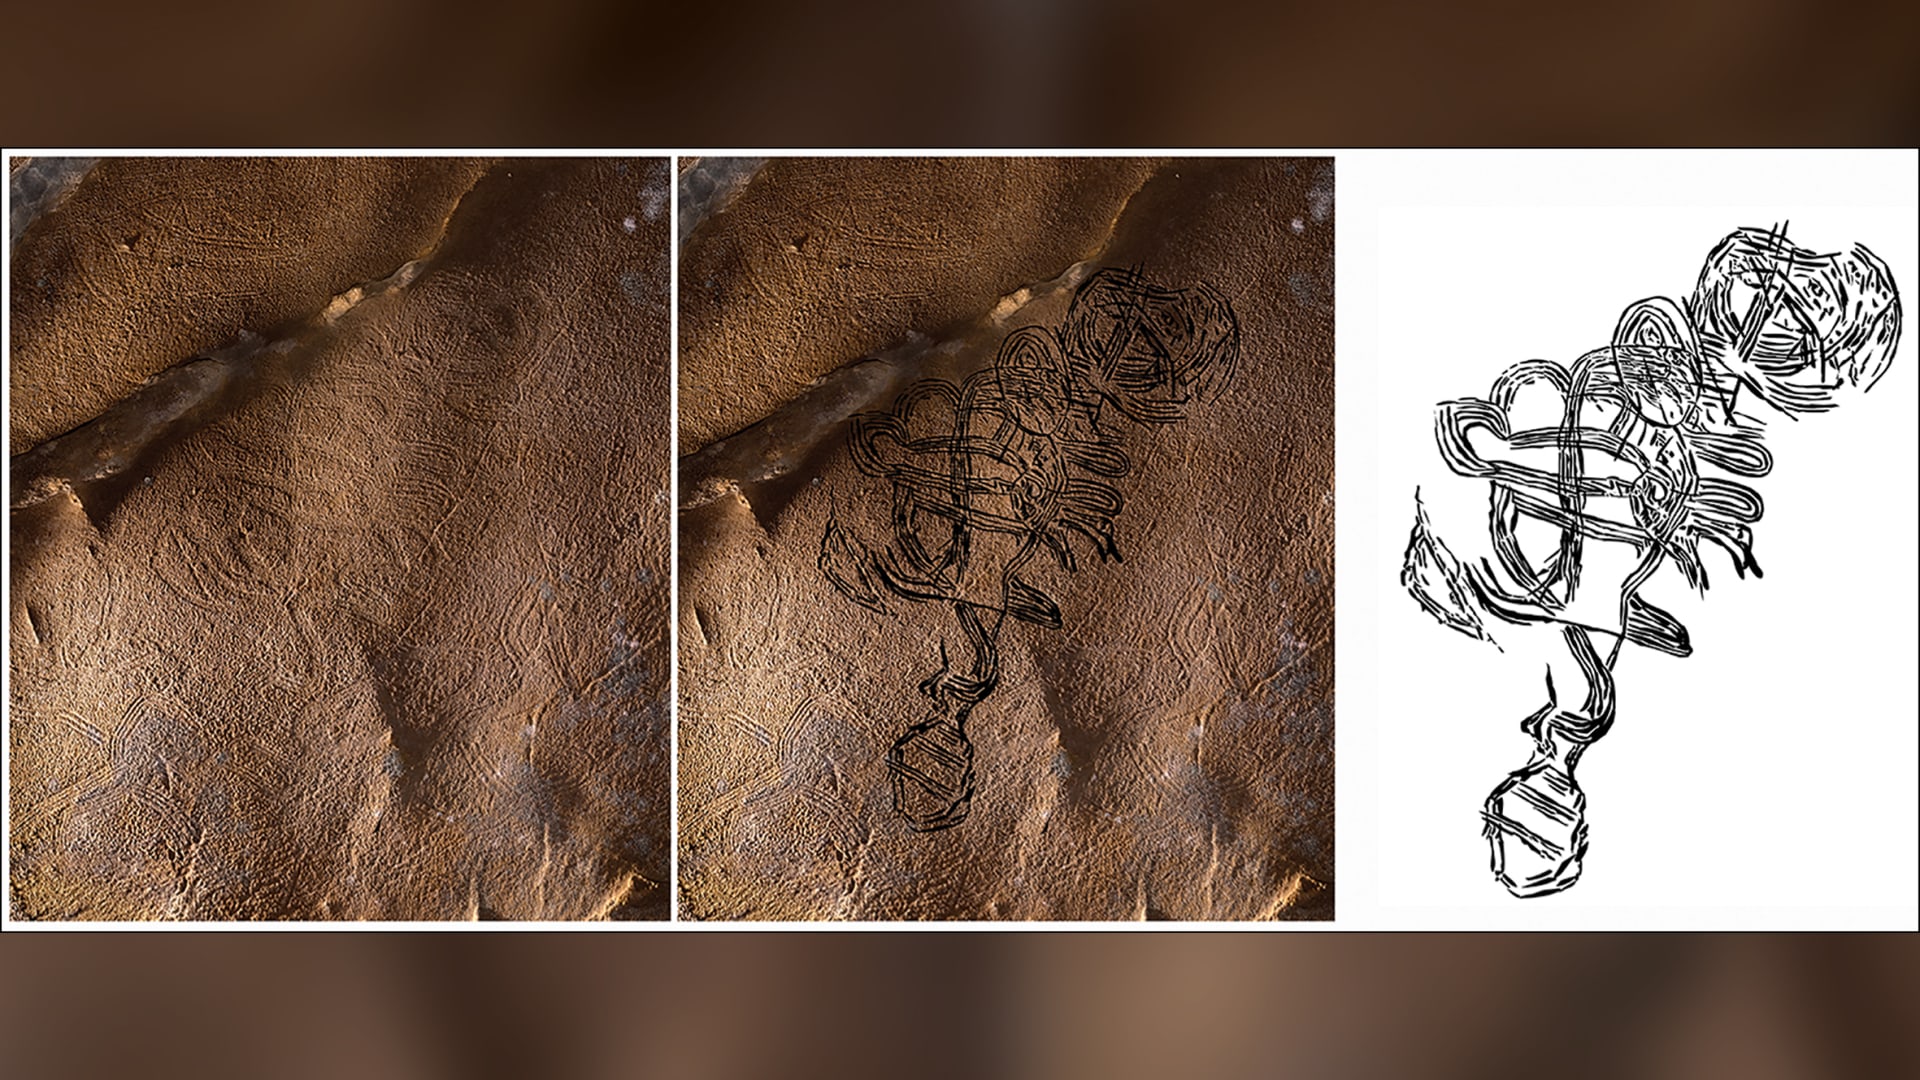 Surprising discovery of secret drawings that will change the view of scientists about cave art .. What is it?